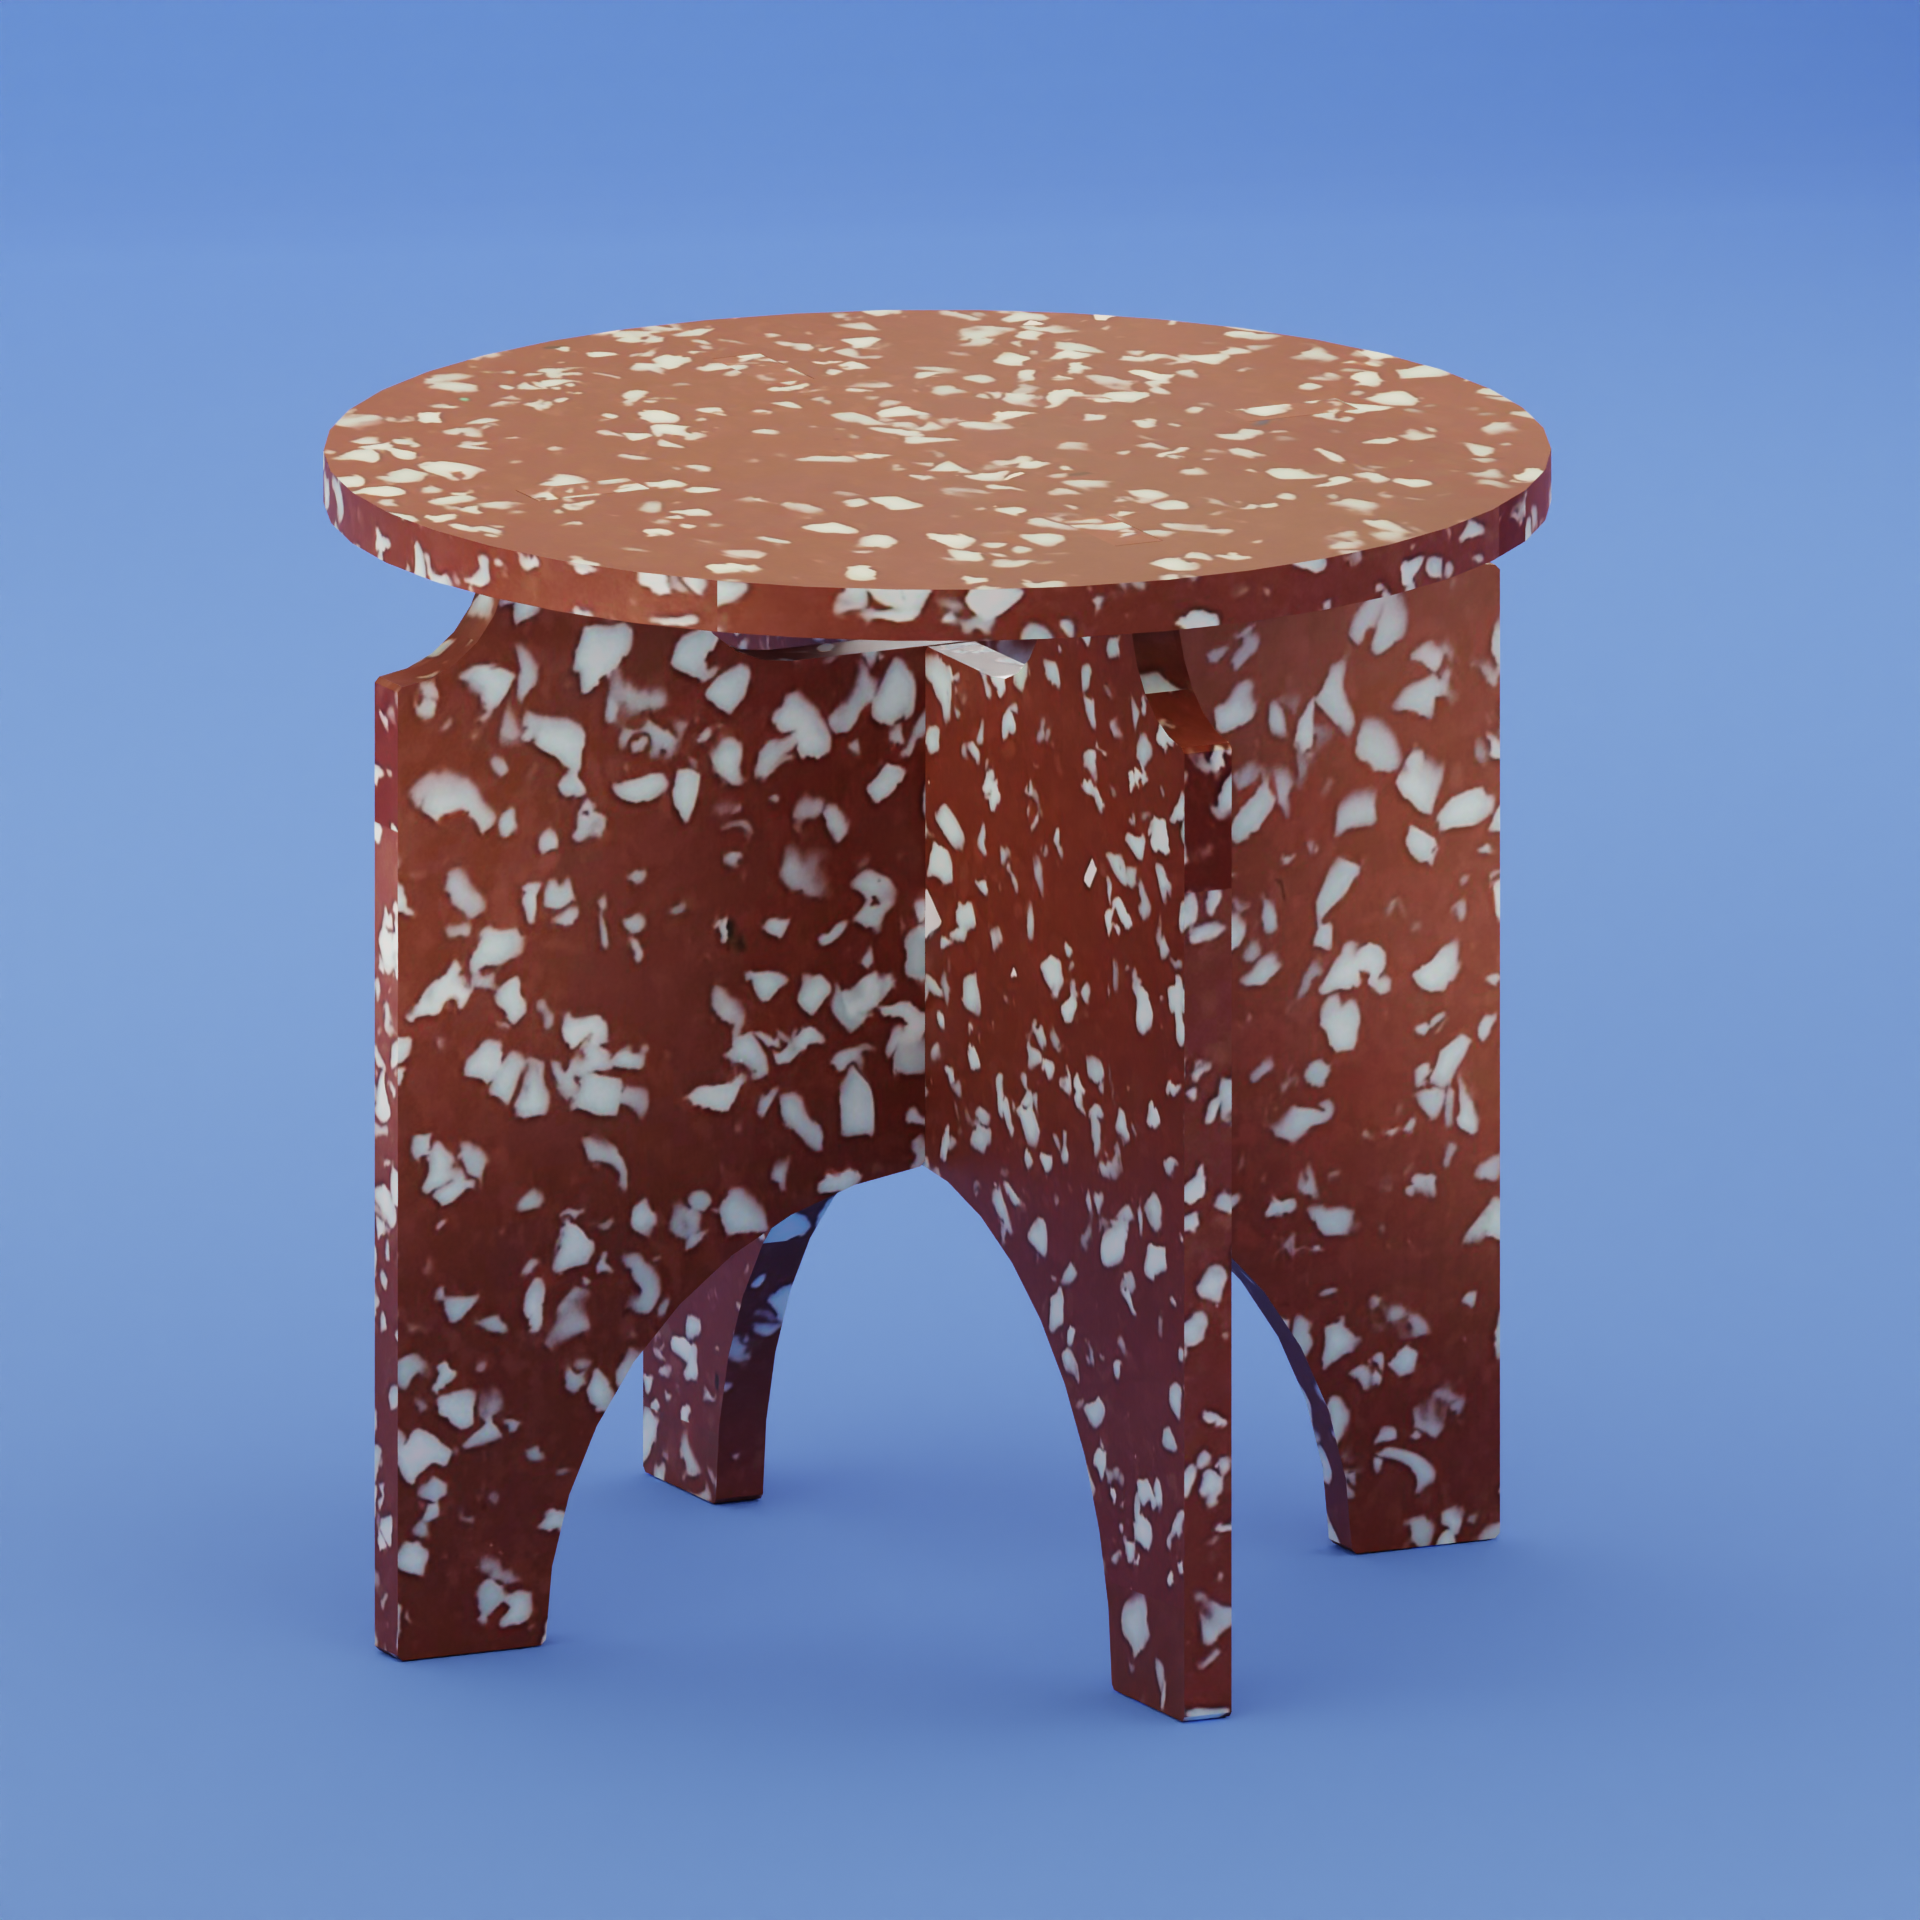 ROUND TOP RED STOOL BY THE MINIMONO PROJECT - BRAND FOR ECO FRIENDLY - PLAYFUL - MULTI FUNCTIONAL - SUSTAINABLE - HIGH QUALITY - DESIGN FURNITURE FROM RECYCLED PLASTIC FOR BOTH ADULT AND CHILDREN MADE IN BERLIN GERMANY